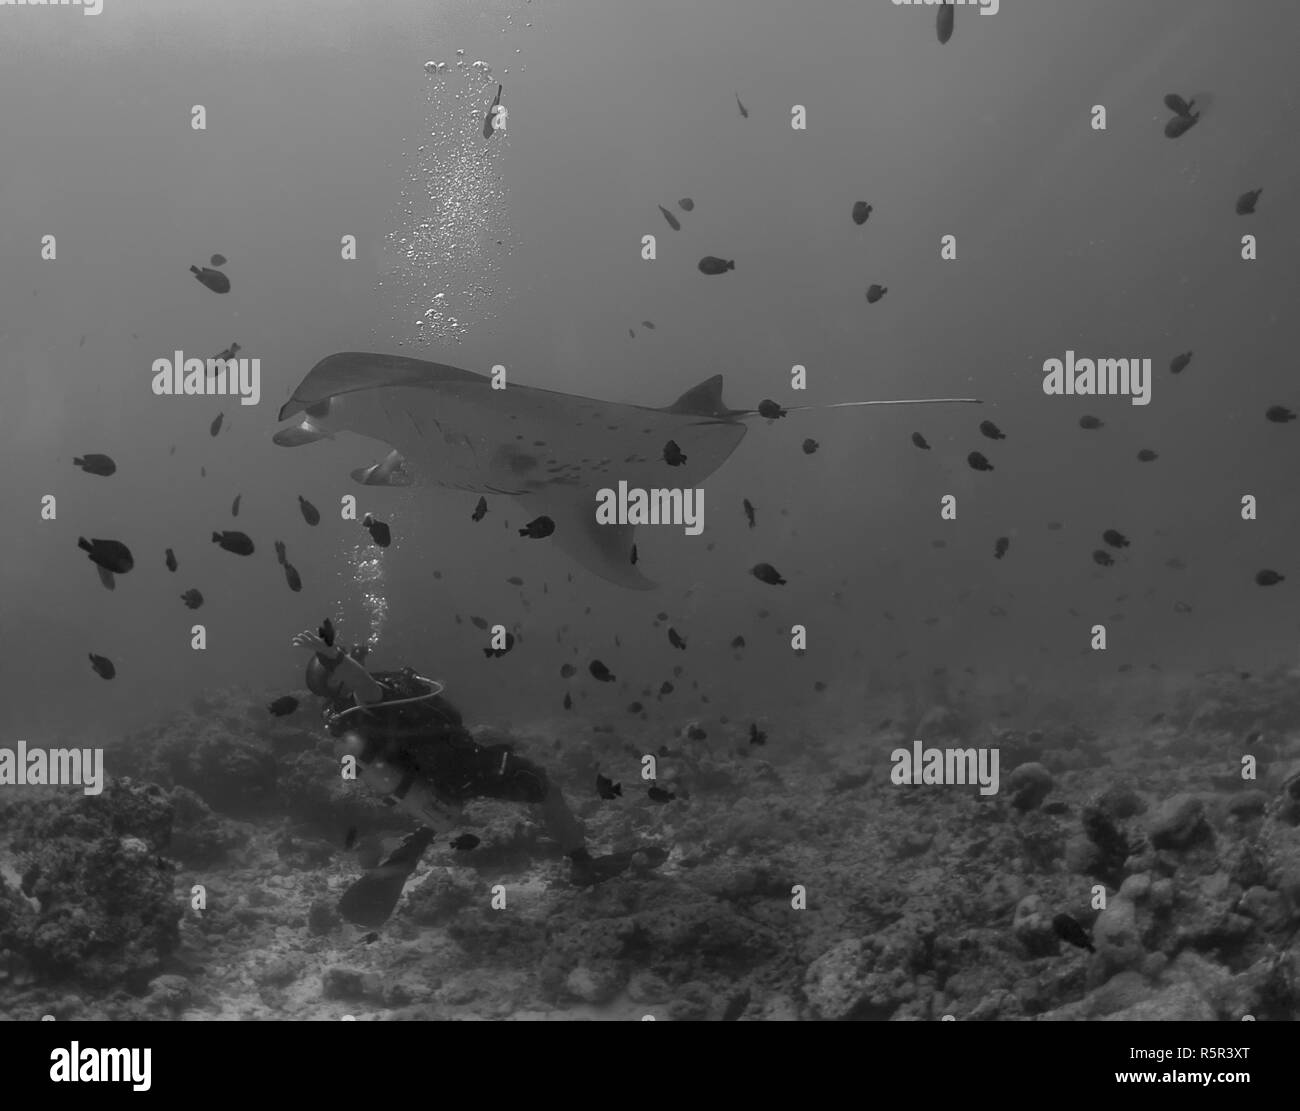 Ocean cleaning Black and White Stock Photos & Images - Alamy